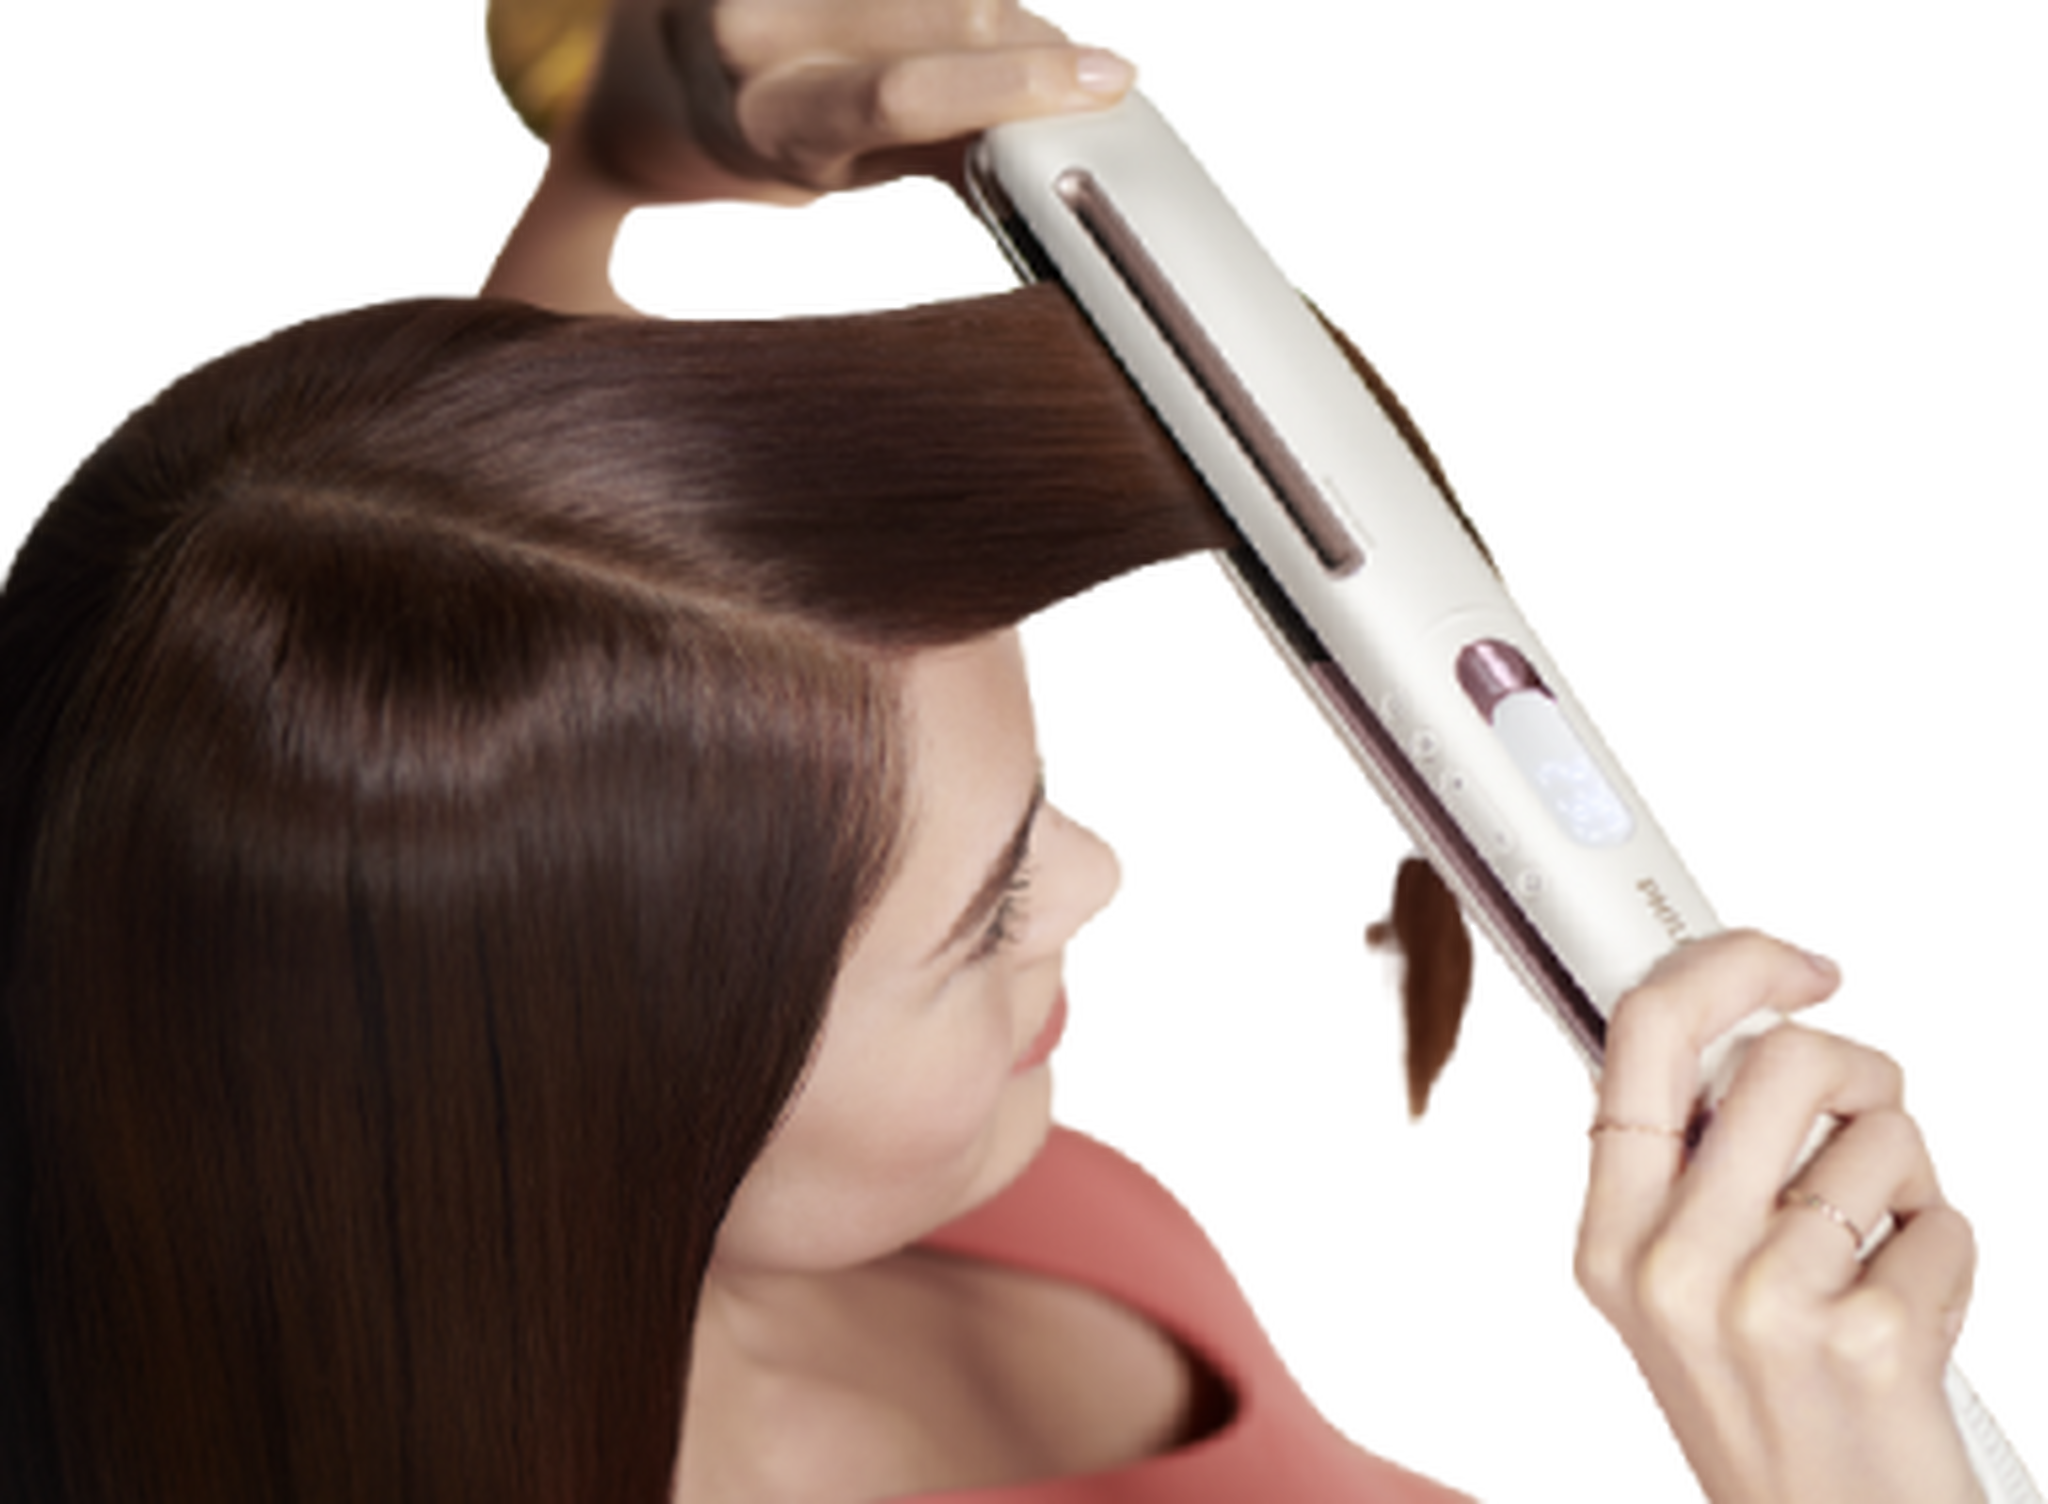 Philips Prestige Hair Straightener with Tetra Ionic System, 14 Temperature Setting Up to  230°C, BHS830/03 - White